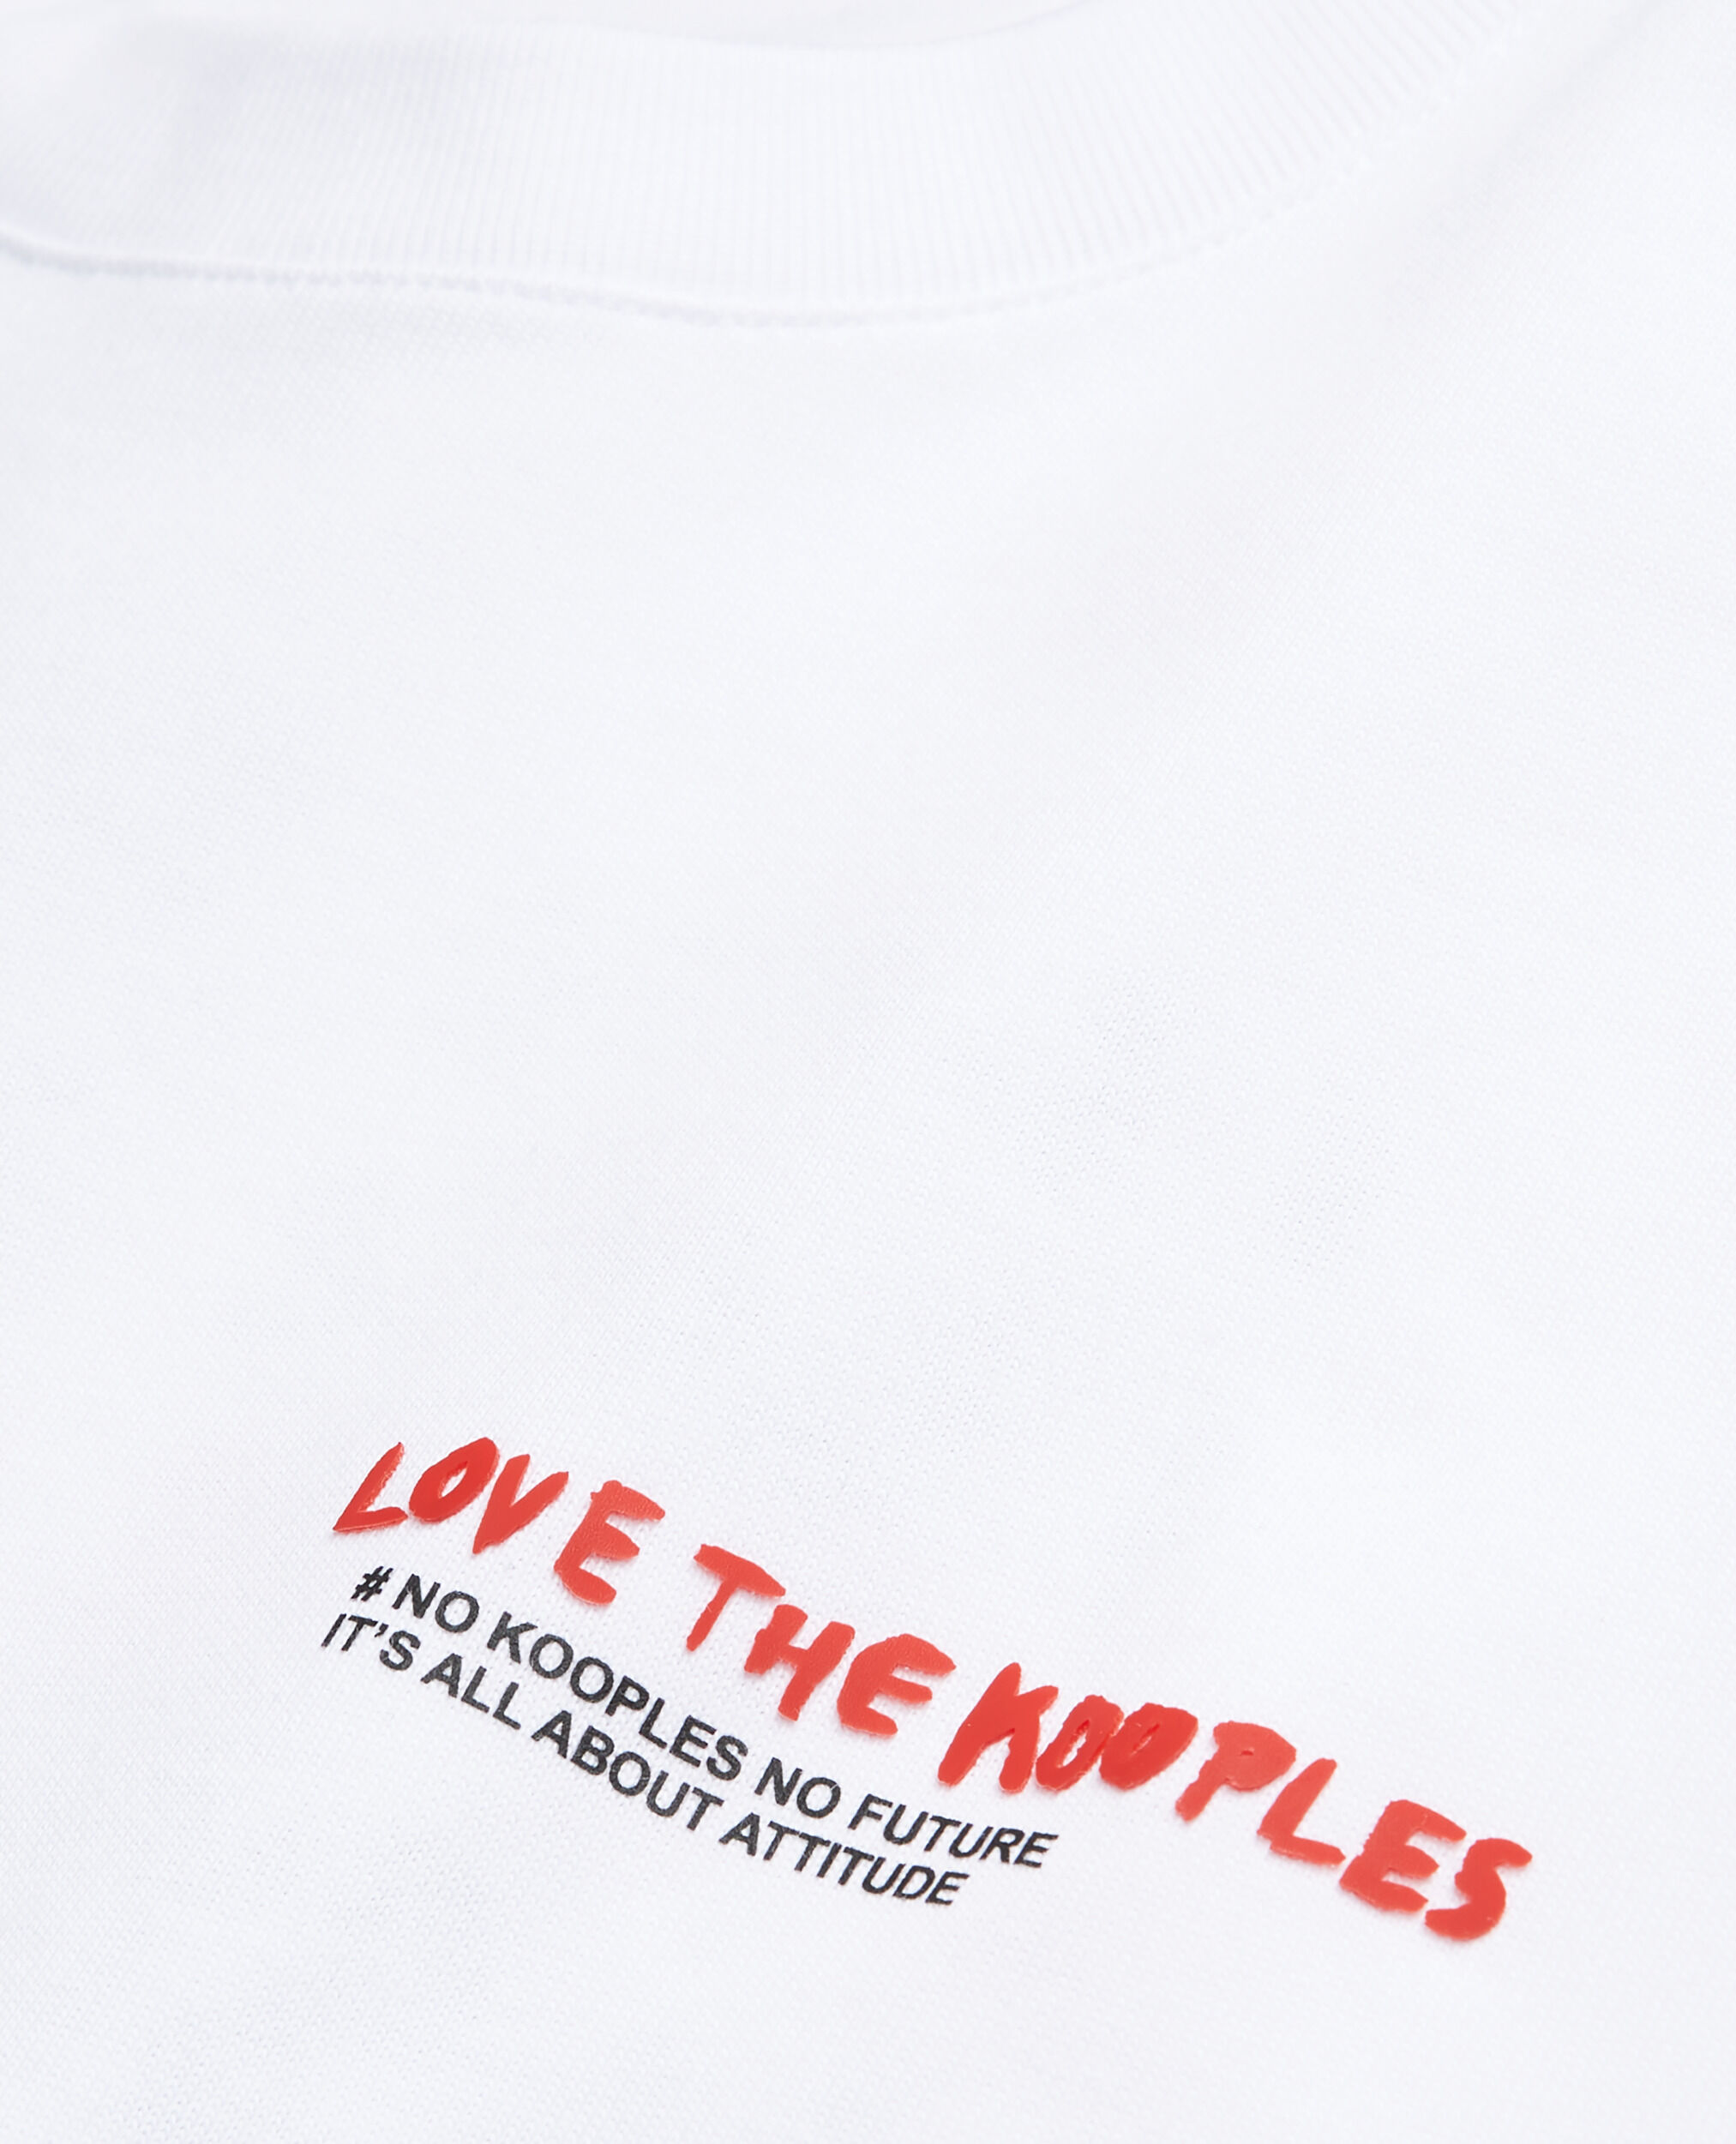 Weißes T-Shirt I love Kooples, WHITE, hi-res image number null